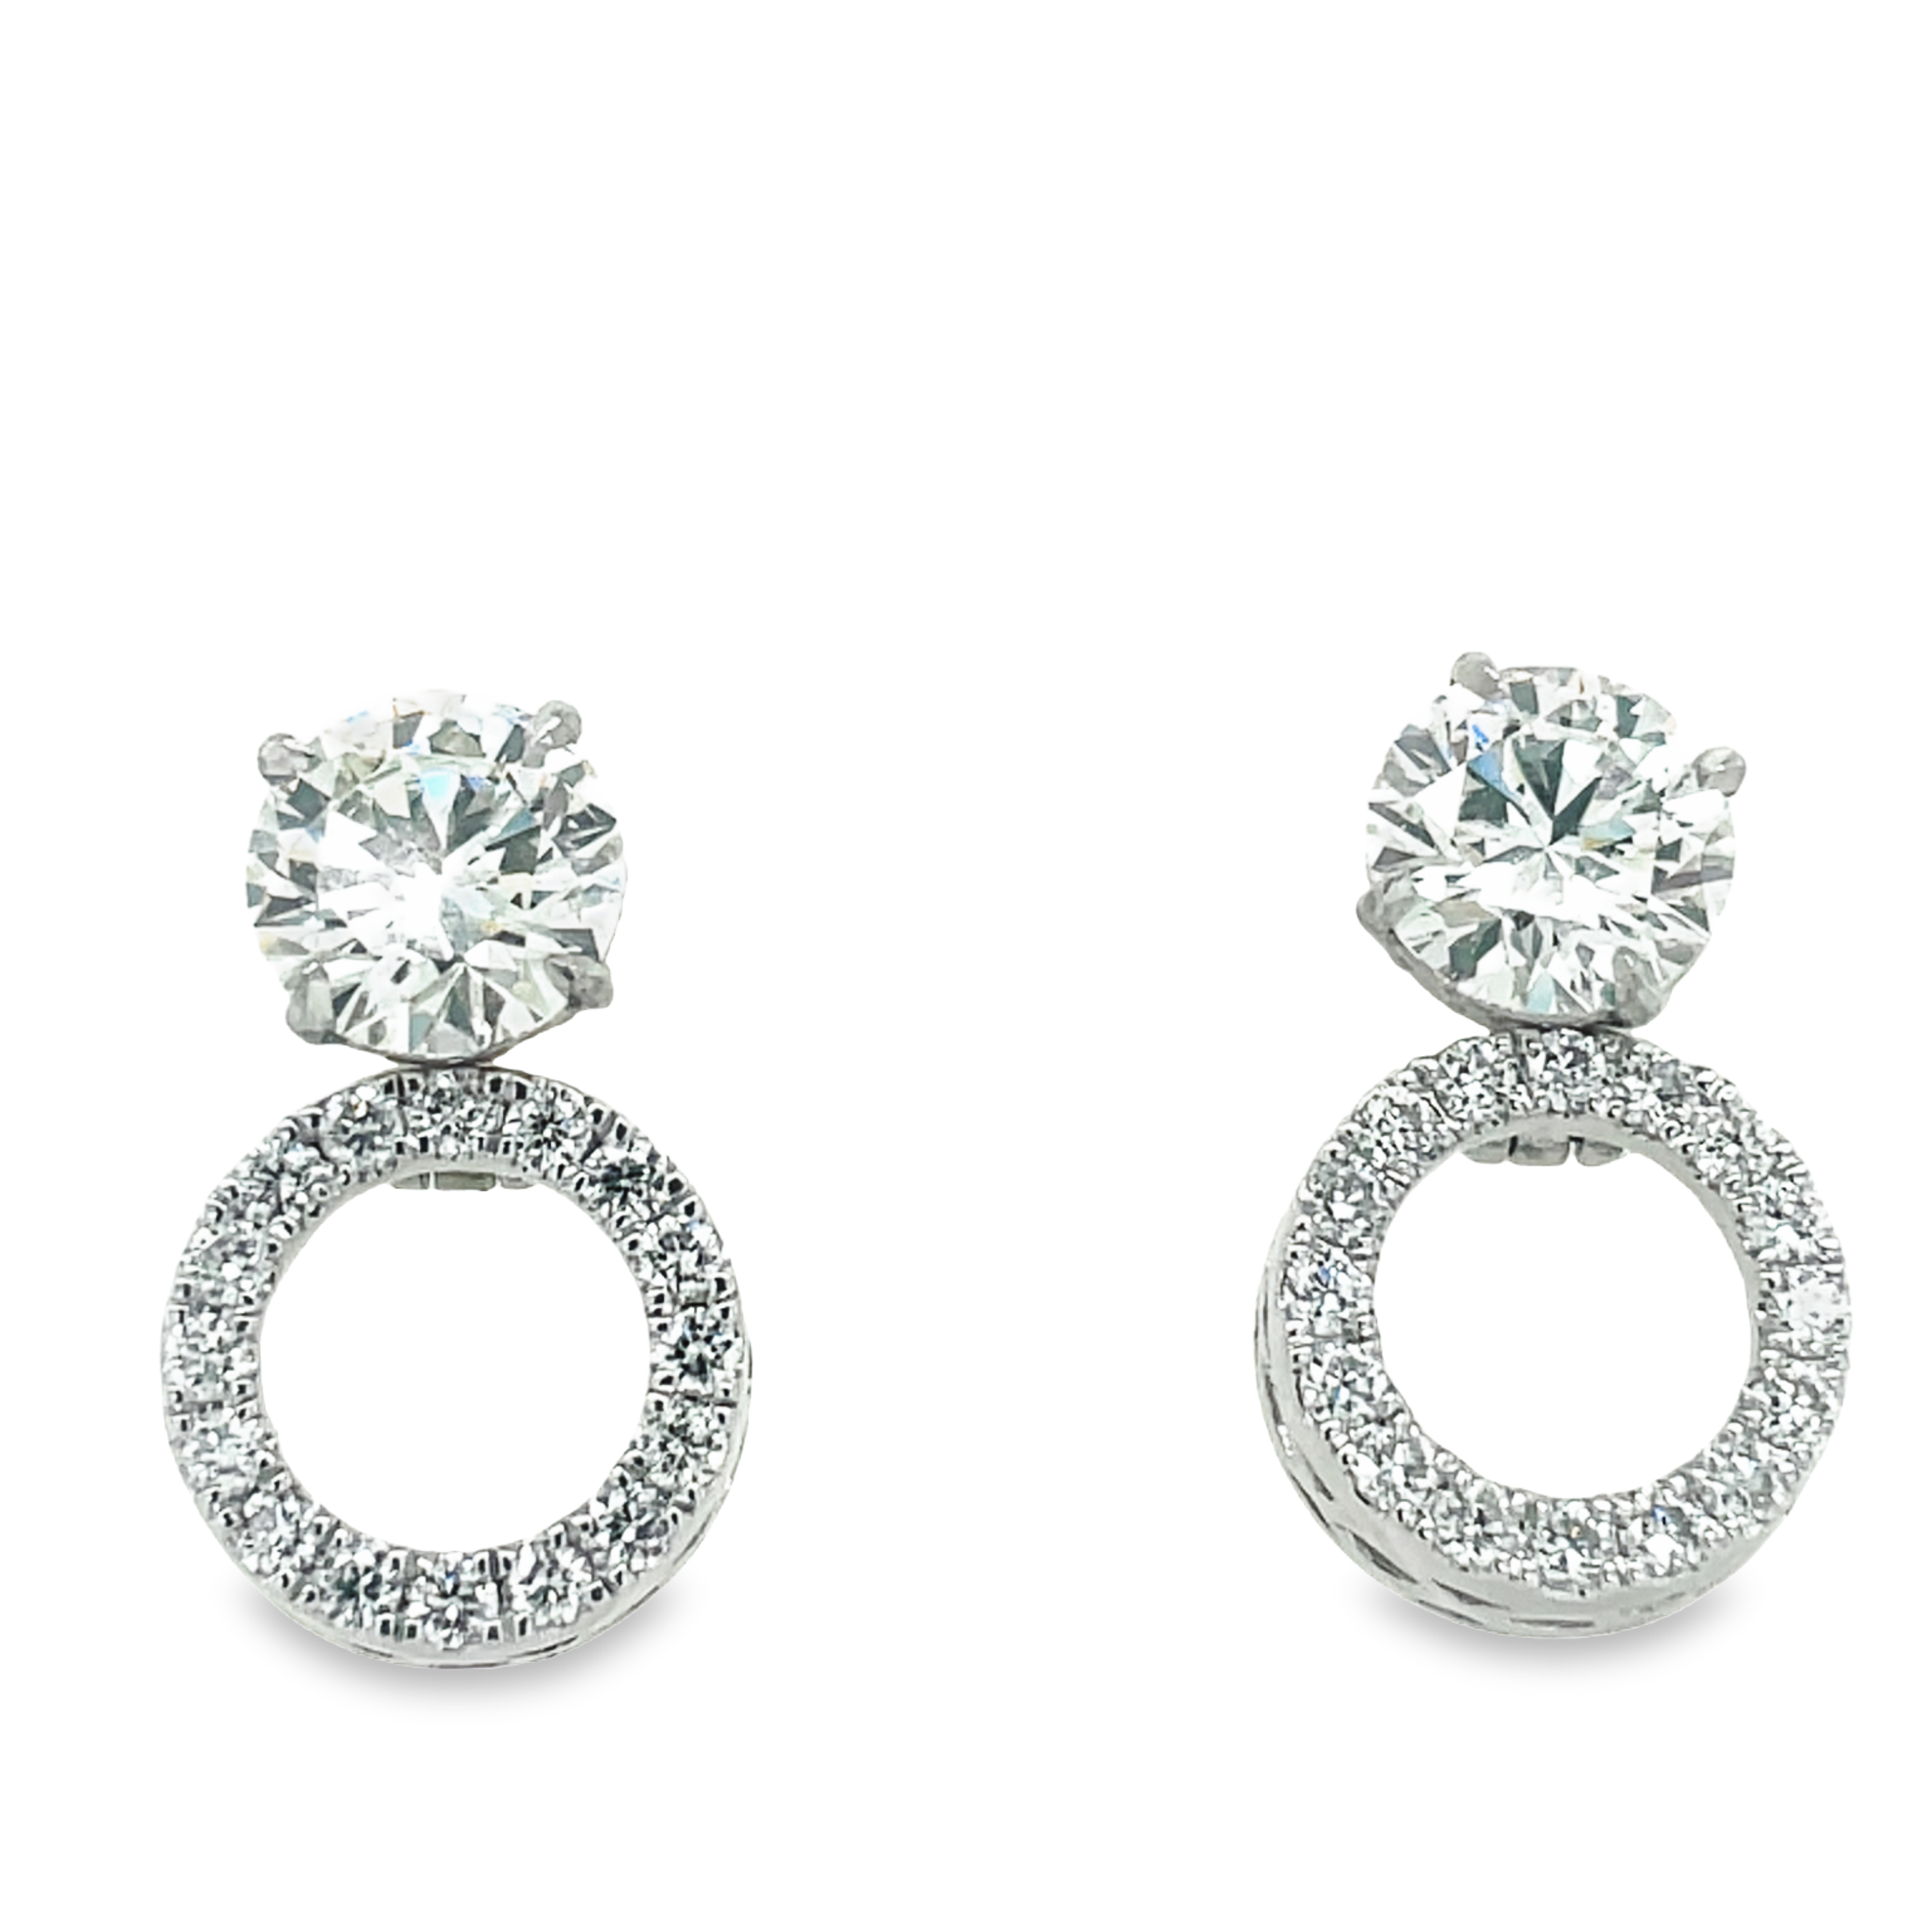 Discover maximum versatility with these round diamond-studded jackets. Crafted with 14k white gold these pieces feature only the finest quality diamonds in F/G grading and 0.90 carats of stunning round diamonds. Wear as a stud earring, or fold down the extender for a unique look. Diamond stud not included.